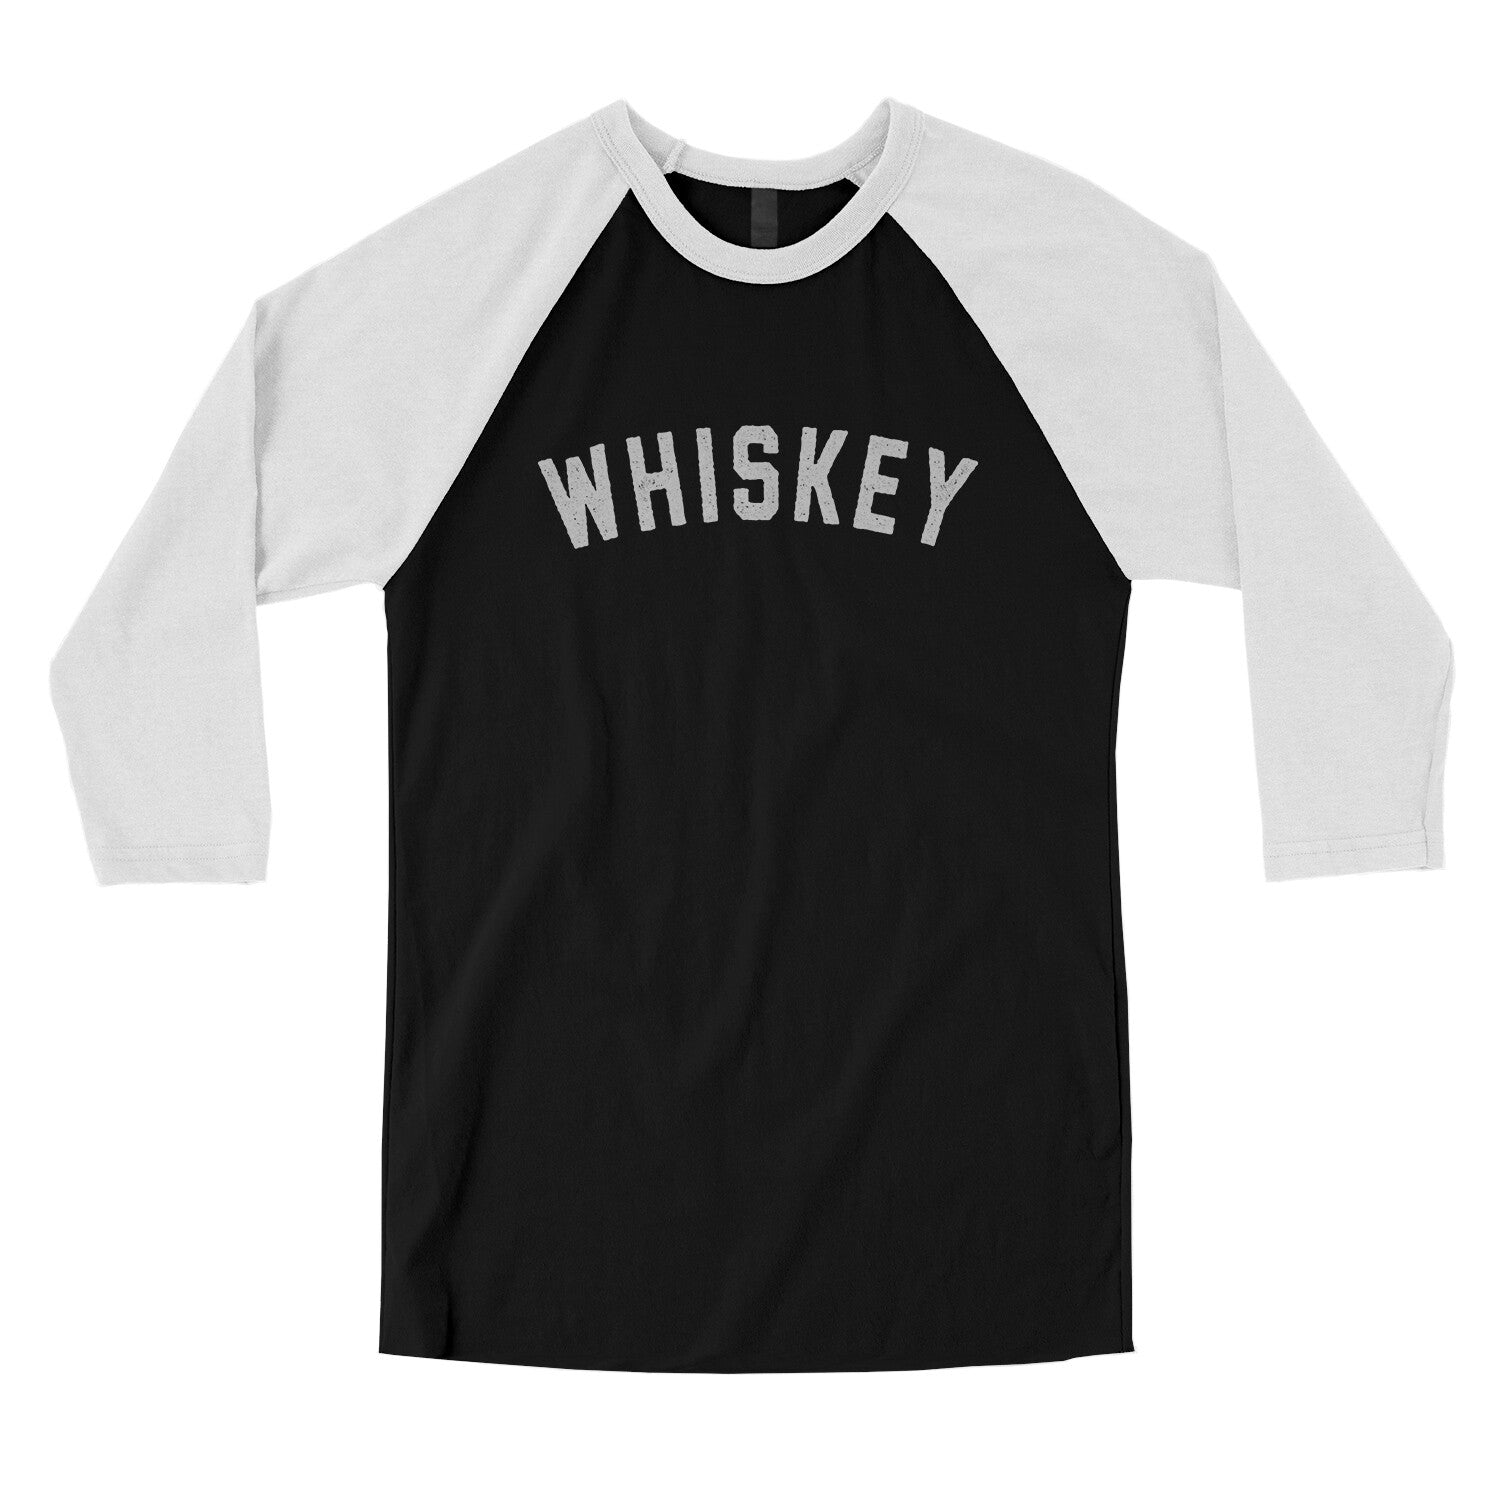 Whiskey in Black with White Color